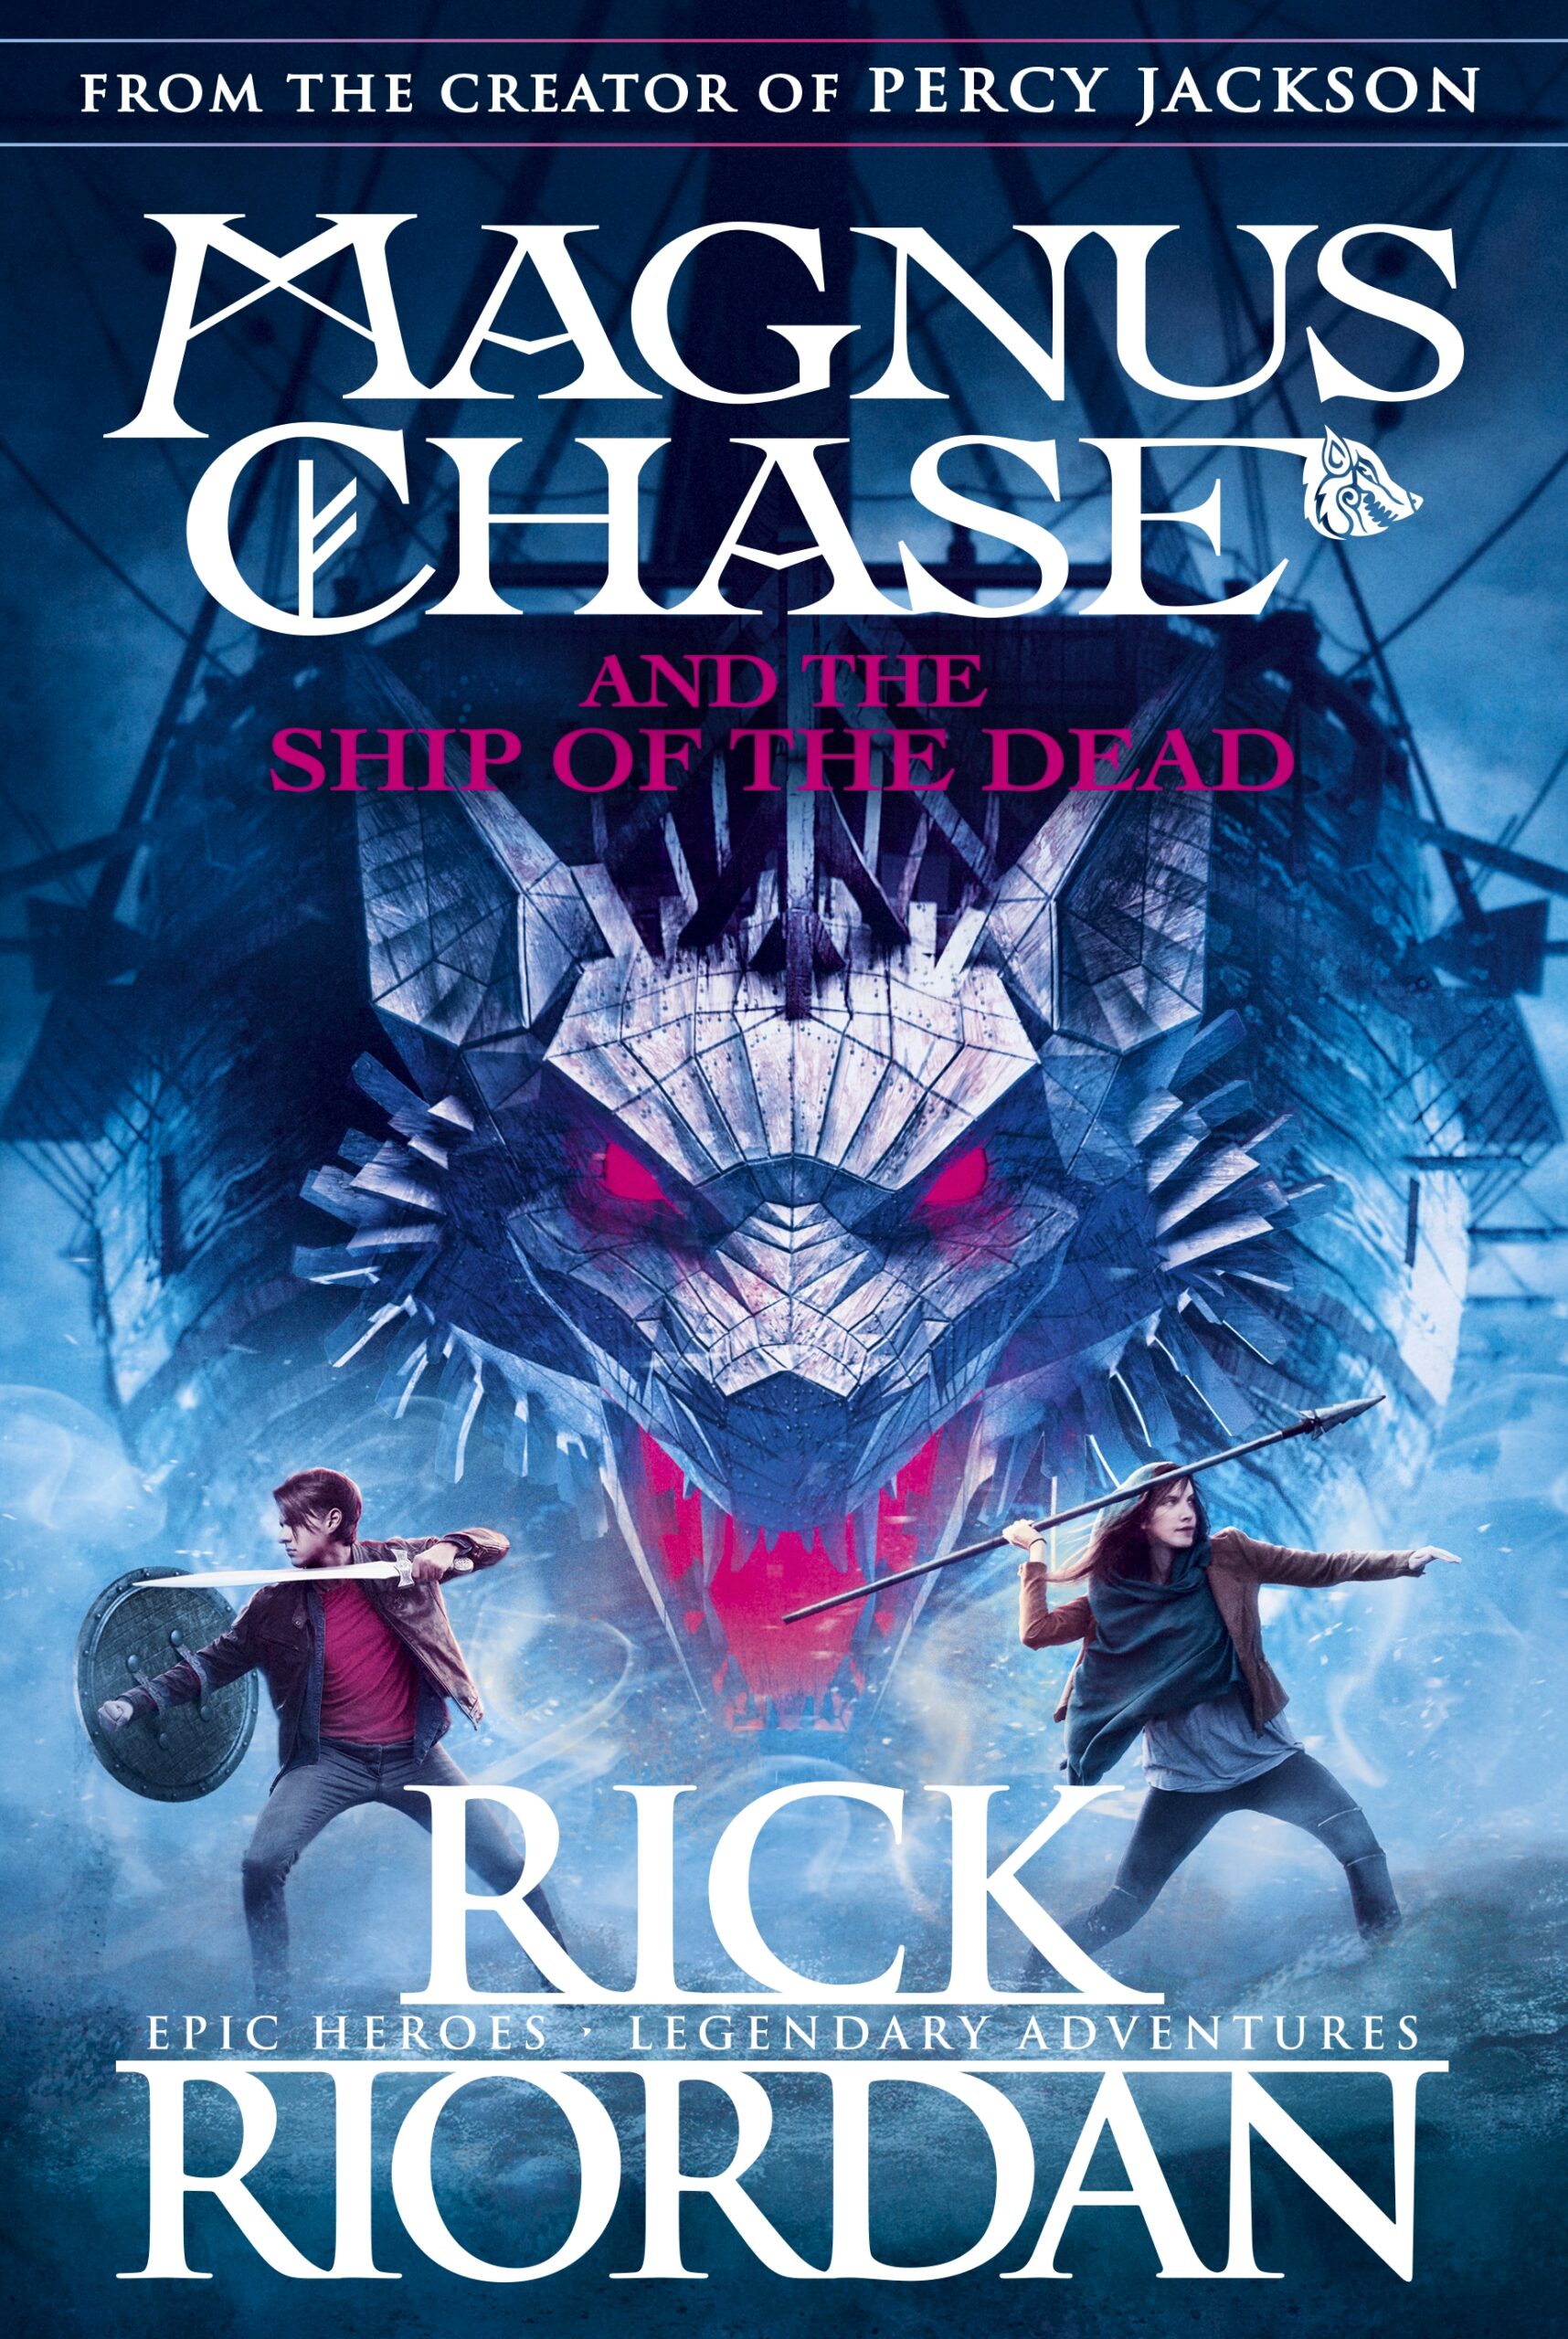 Magnus Chase and the Ship of the Dead (#3)- Rick Riordan